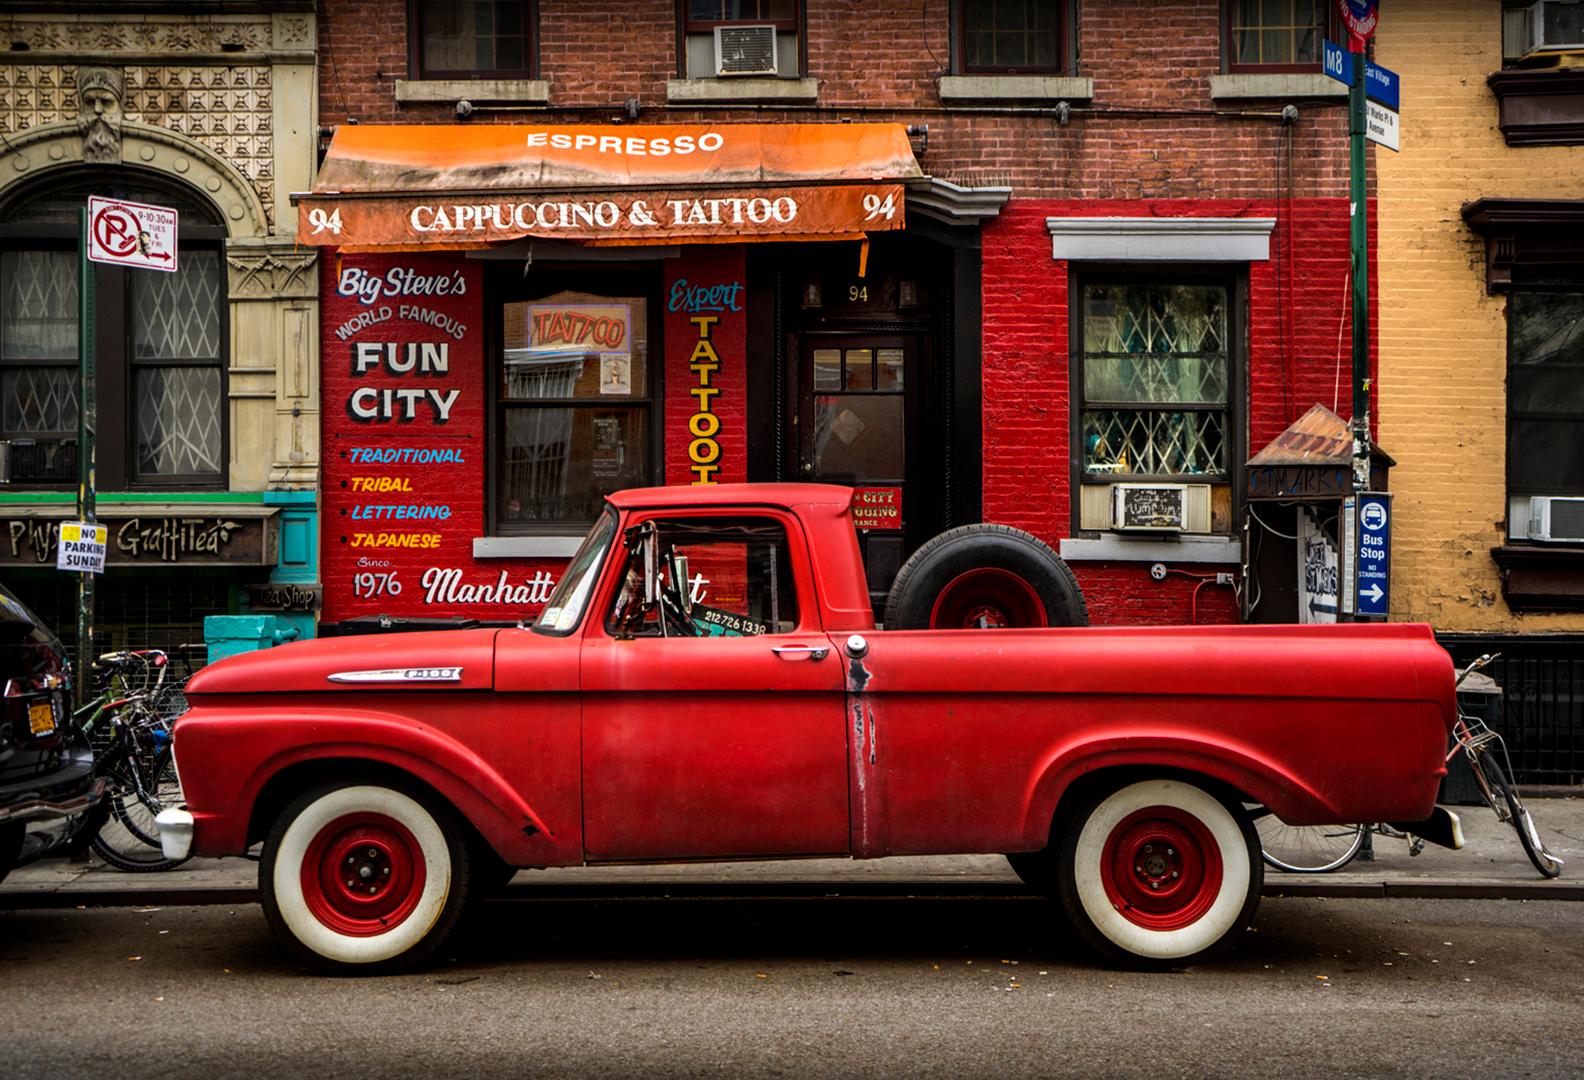 Artist: Sally Davies (1956)
Title: Red Vintage Truck Tattoo (New York City)
Year: 2022
Medium: Inkjet print on archival paper
Edition: 12, plus proofs
Size: 17 x 22 inches
Condition: Excellent
Inscription: Signed, dated, titled by the artist
Notes: